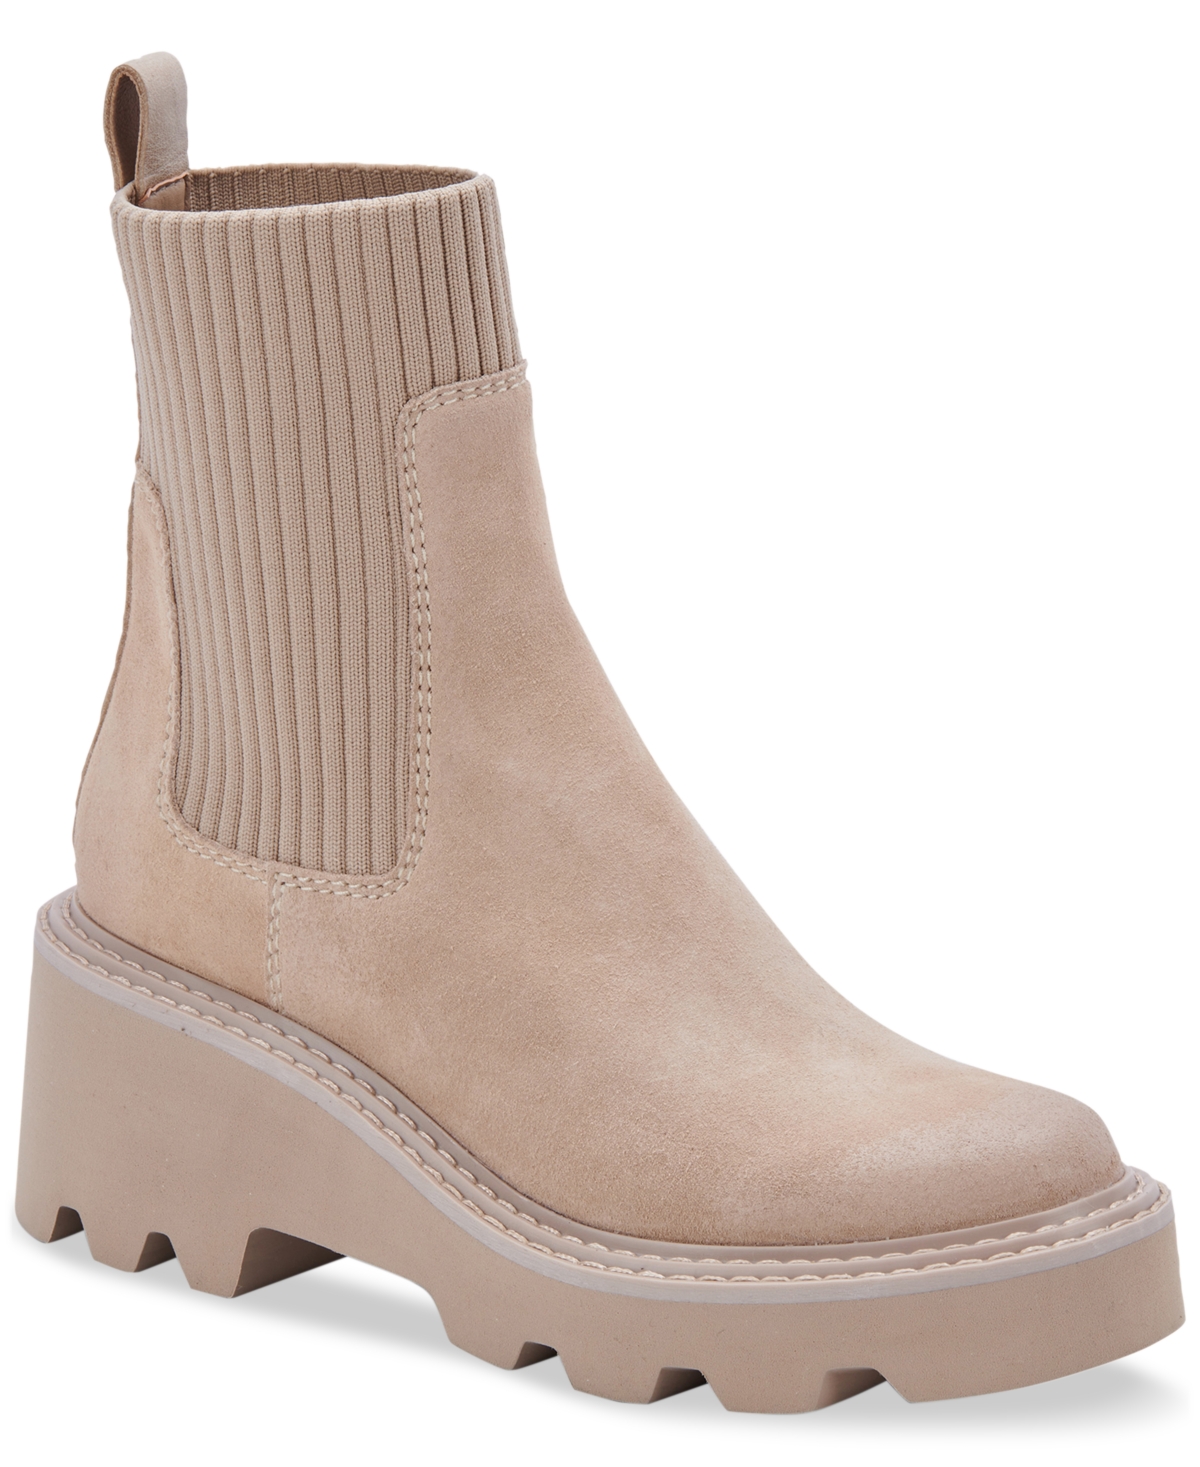 DOLCE VITA WOMEN'S HOVEN H2O LUG-SOLE BOOTS WOMEN'S SHOES